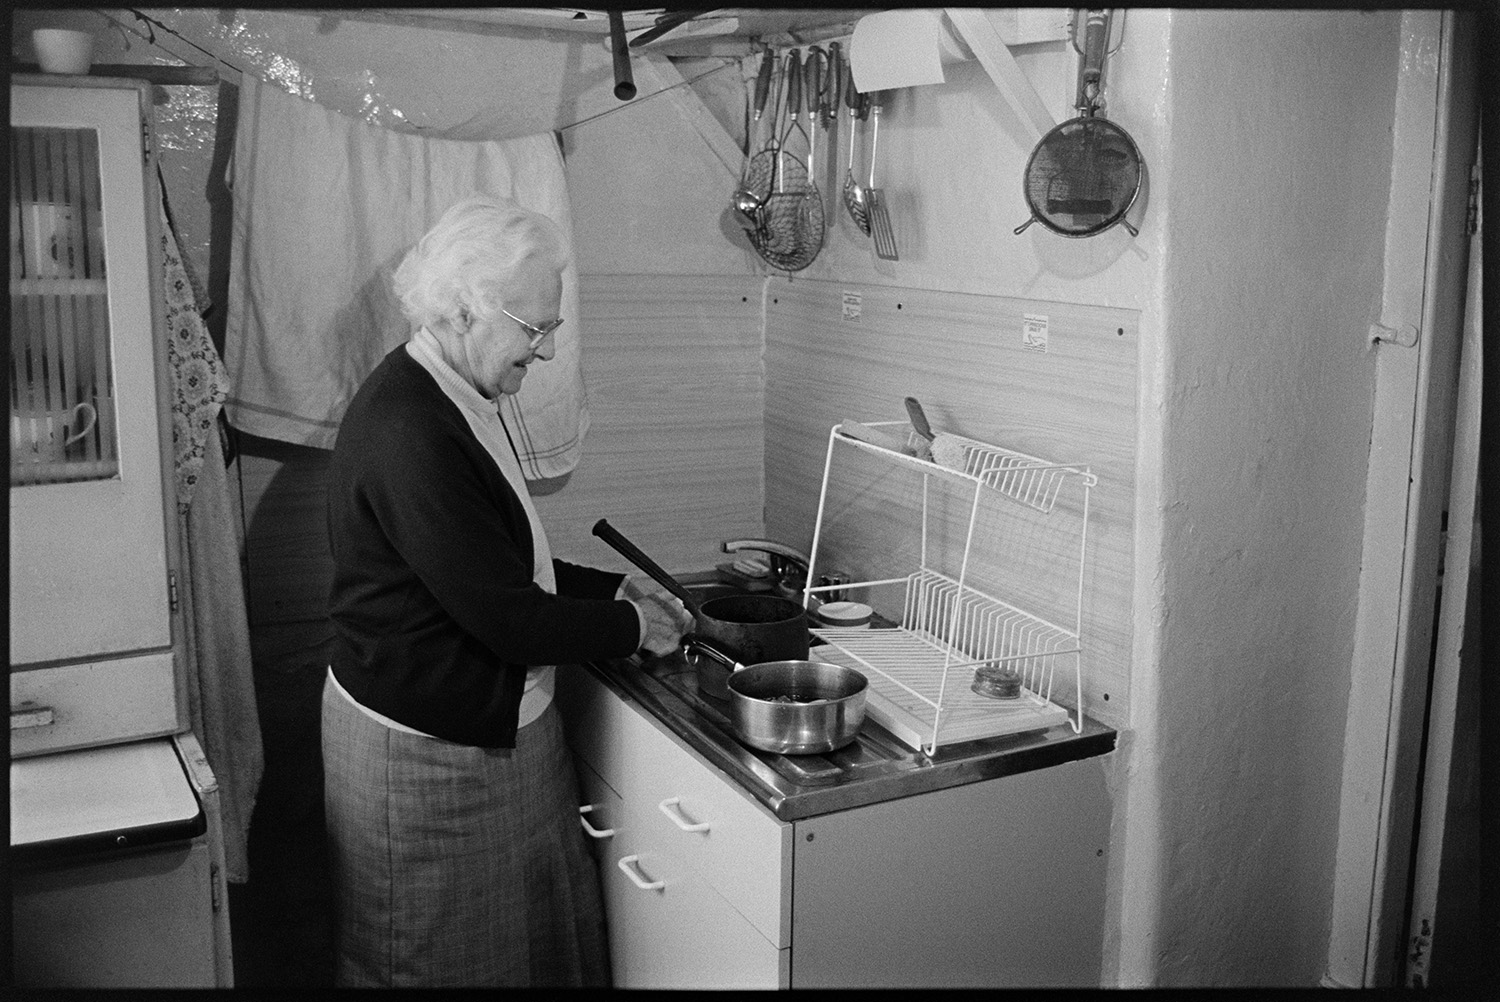 Woman working at kitchen sink. 
[Winnie Jury washing saucepans in her kitchen sink in her house at Leigh Road, Chulmleigh. A rack is visible on the draining board and cooking utensils are hung above the sink.]